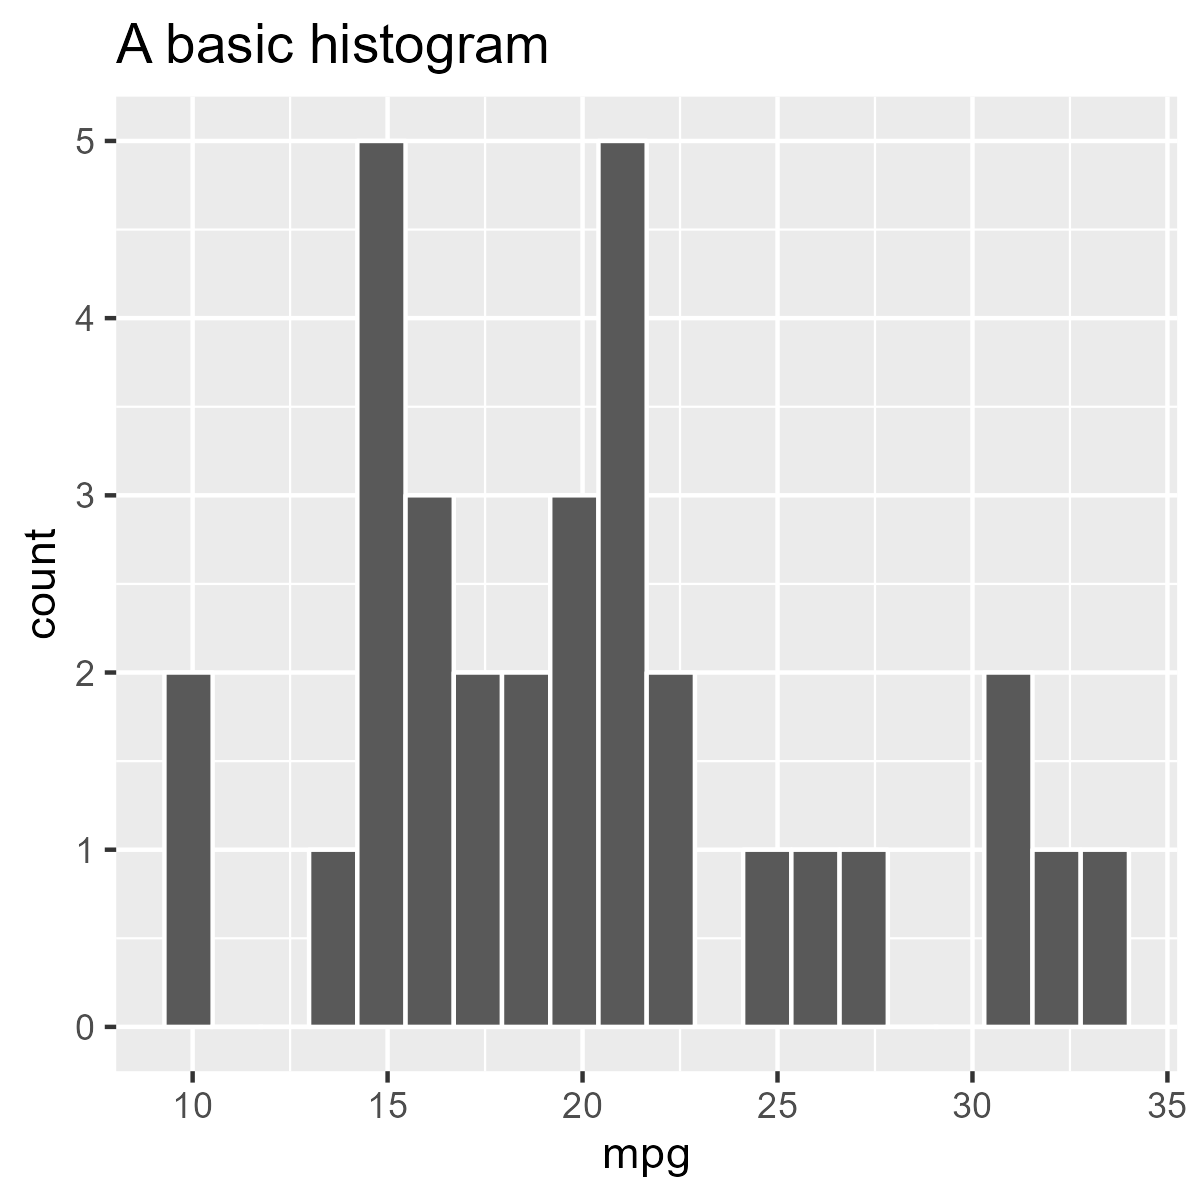 A ggplot2 plot of a histogram with the plotting code above the image.